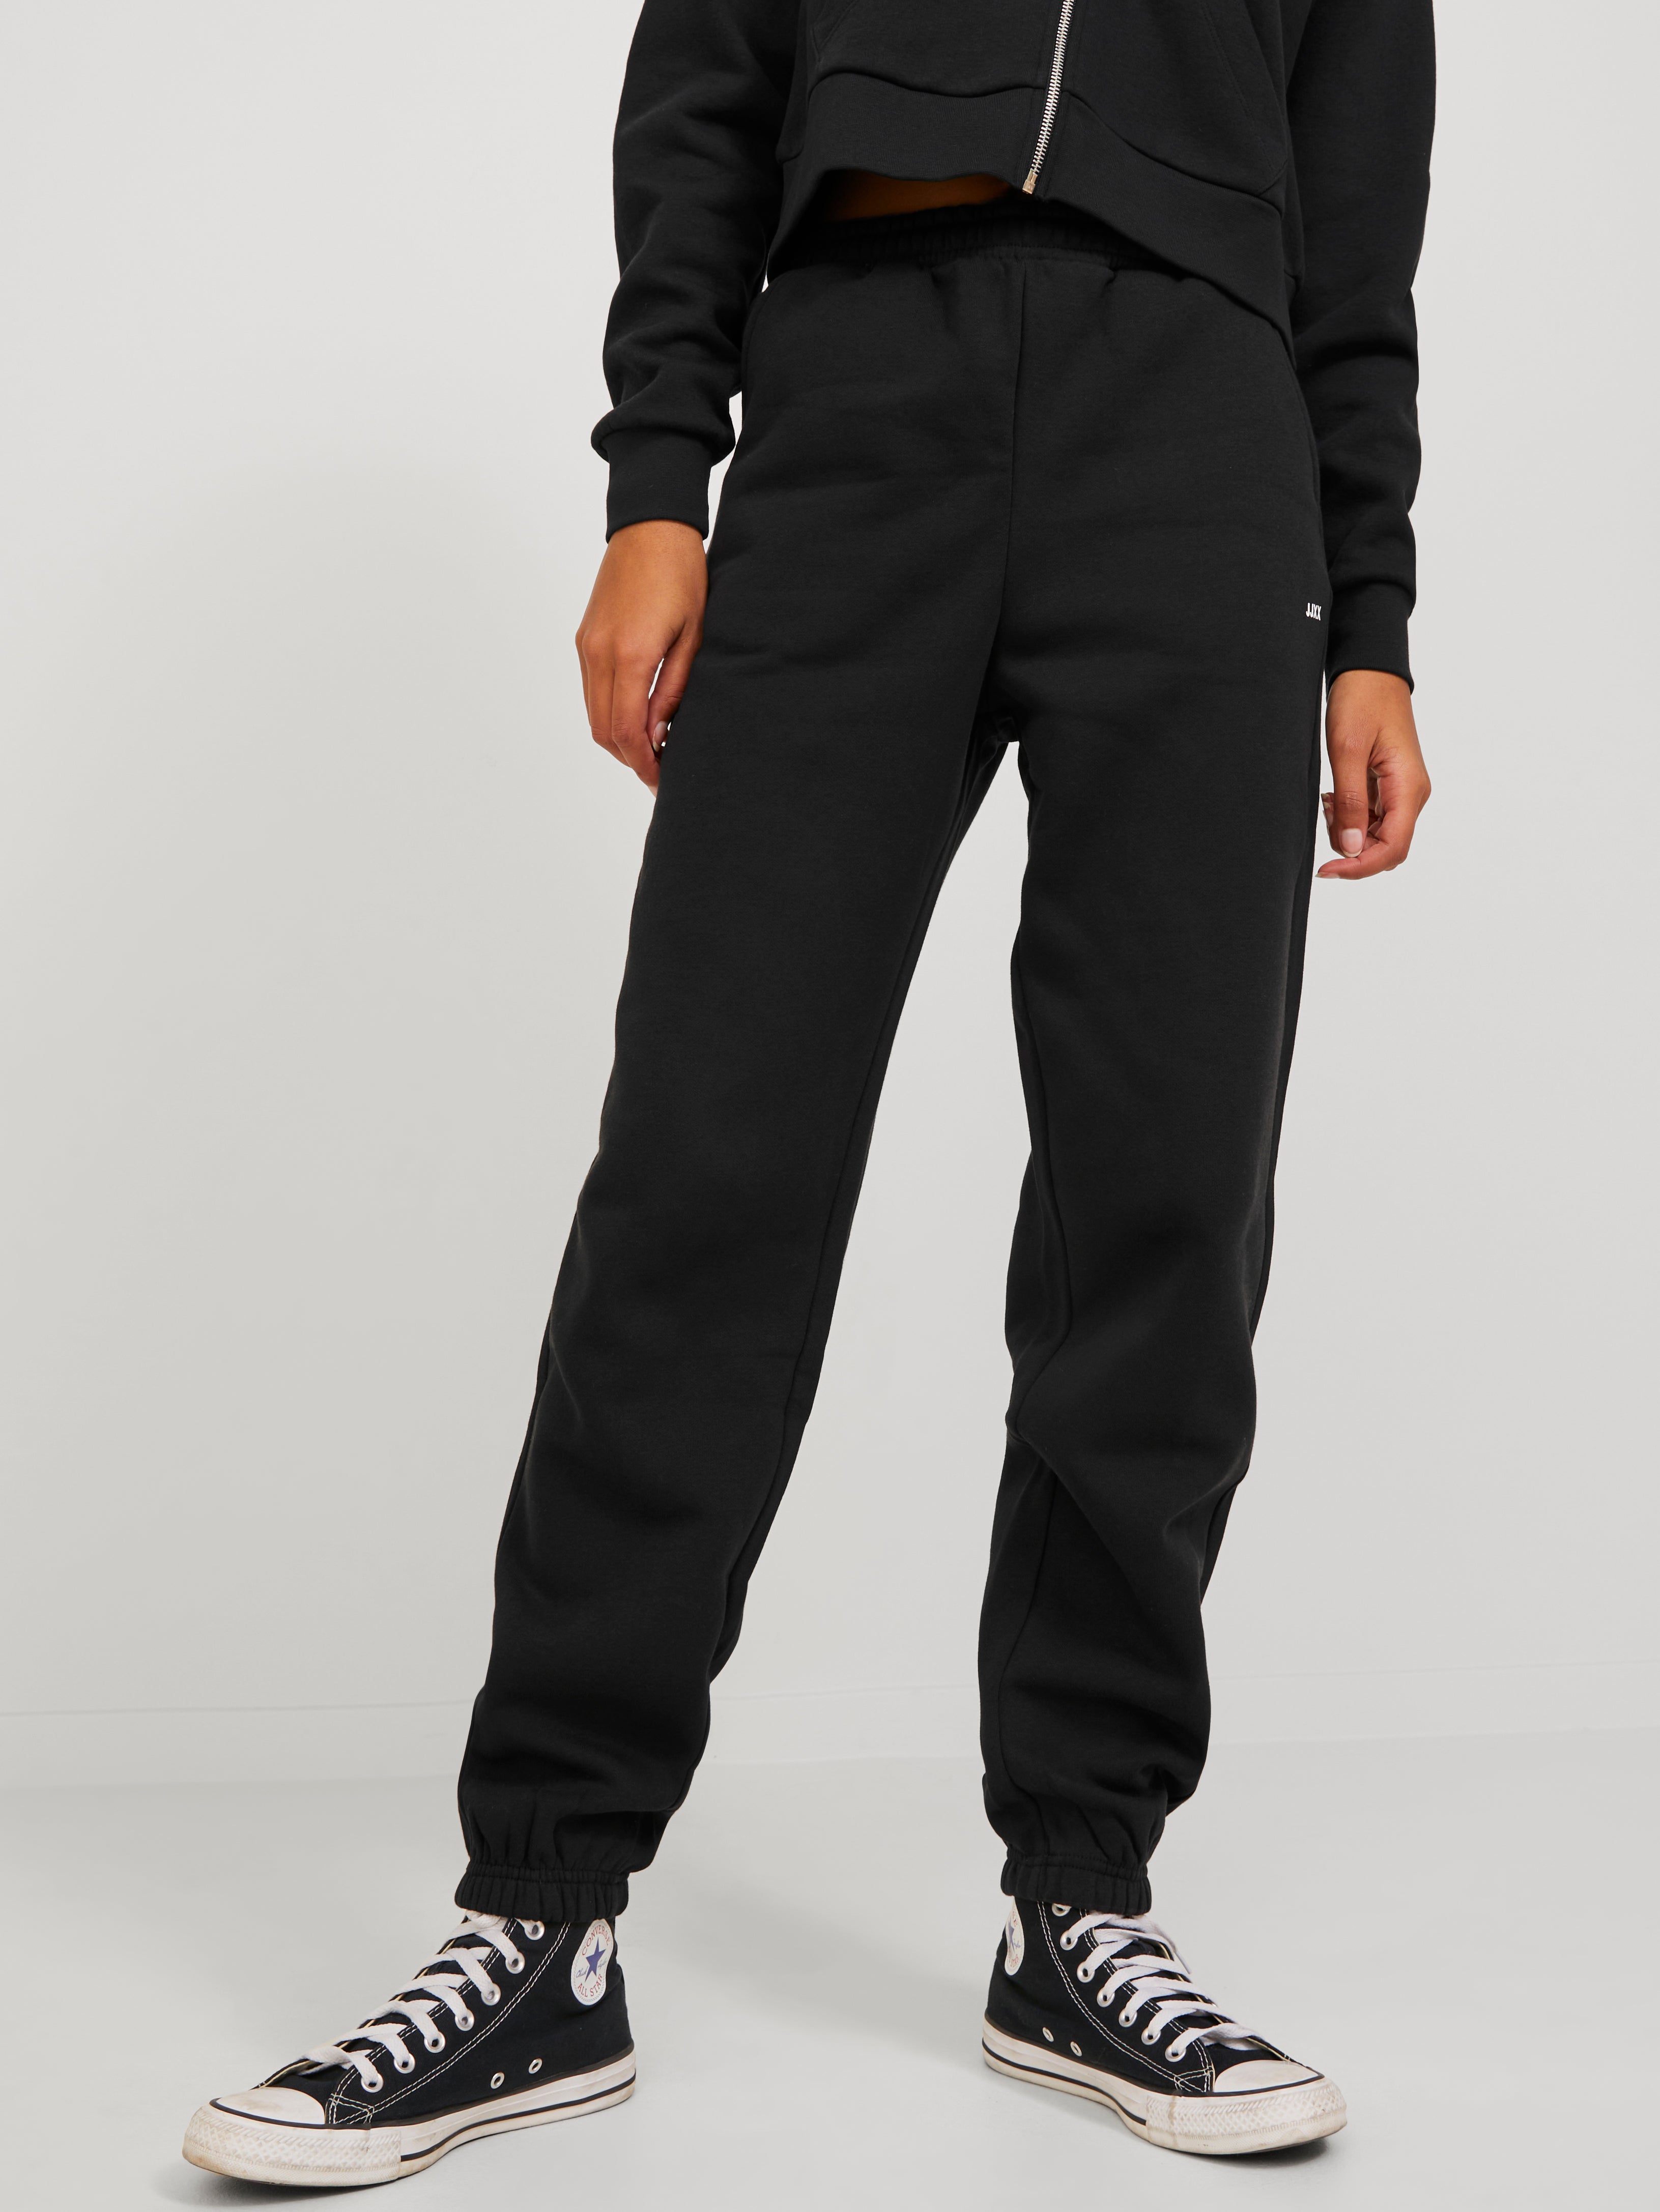 Male Original Jack and Jones track pants, S/M/L/Xl at Rs 470/piece in Surat